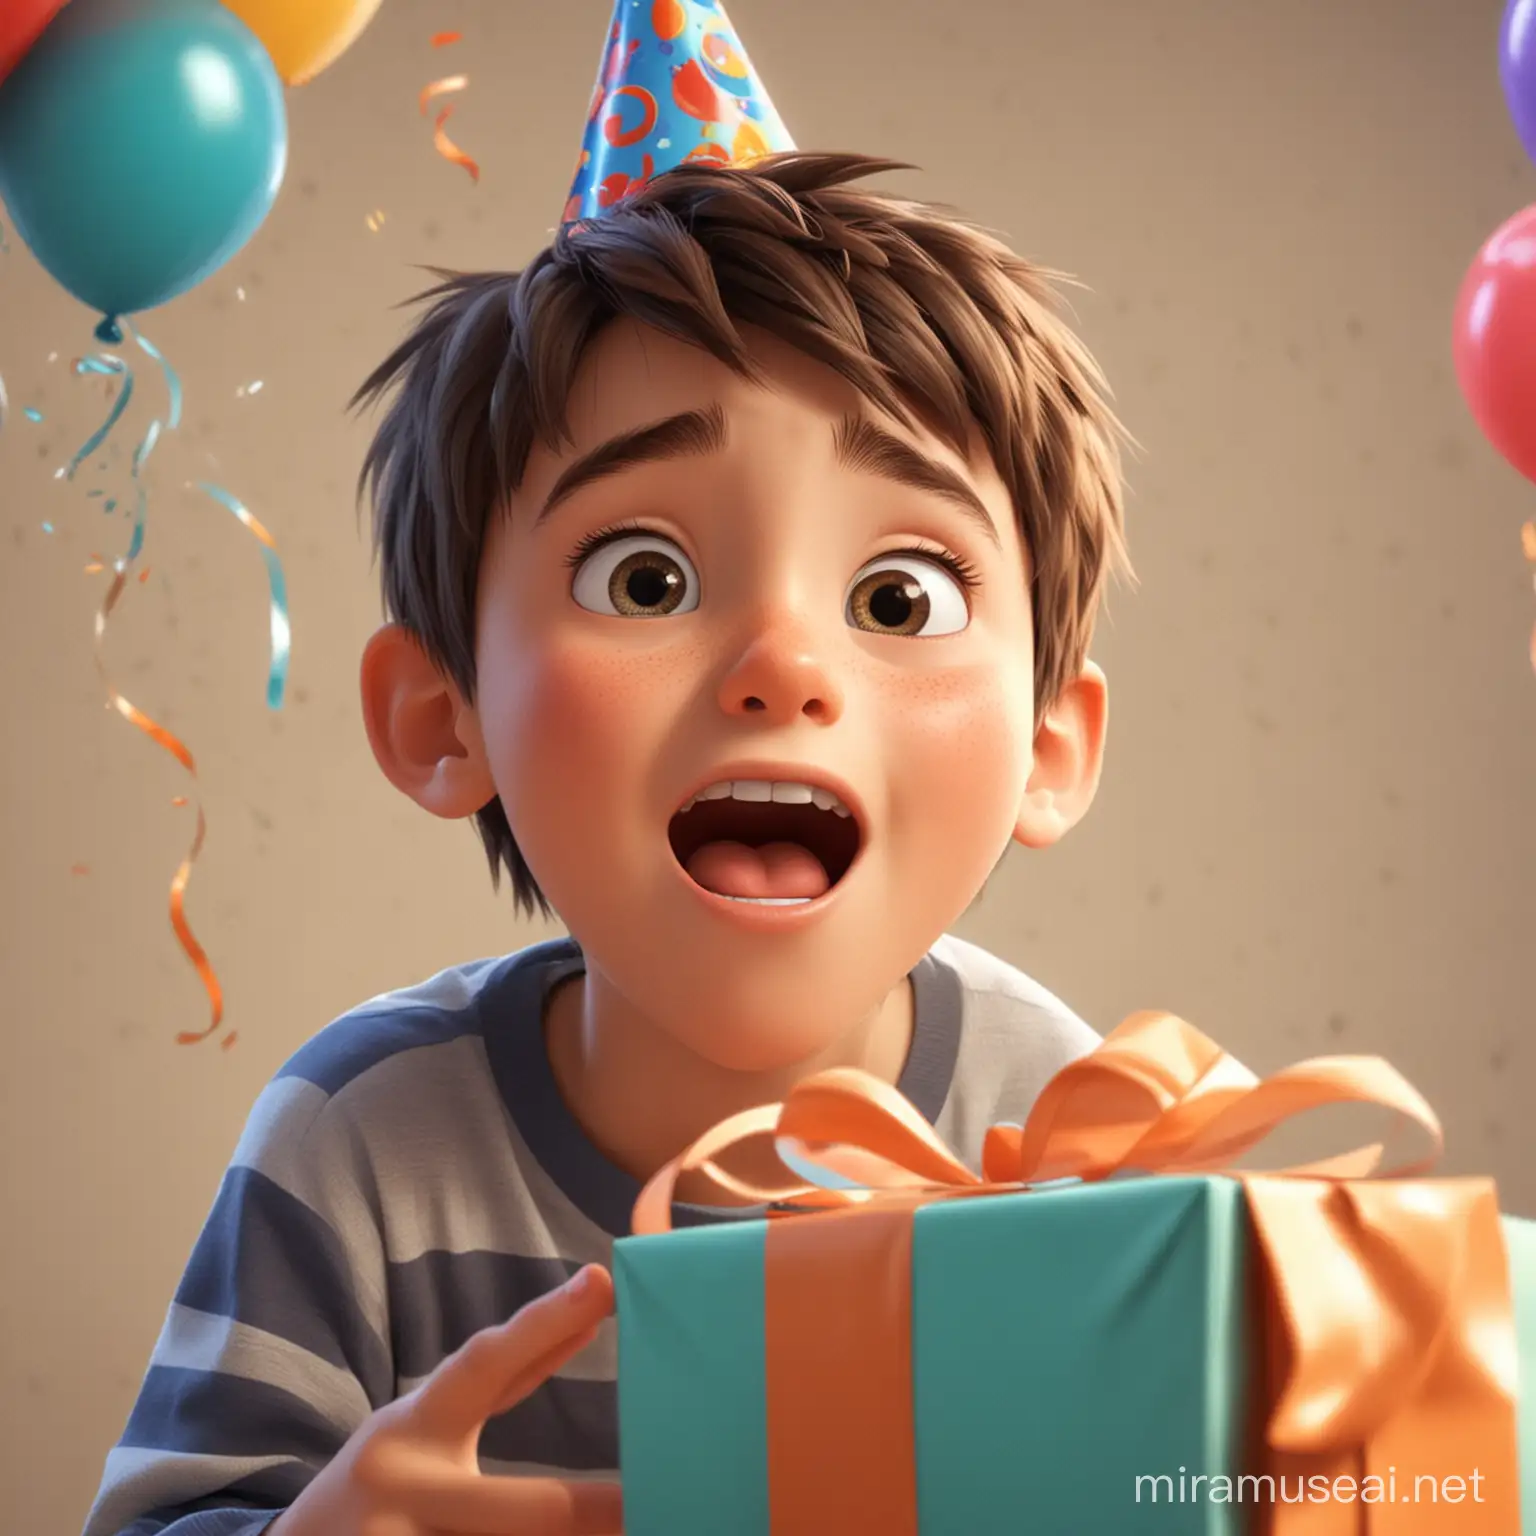 Animated Boy Receives Surprise Birthday Gift